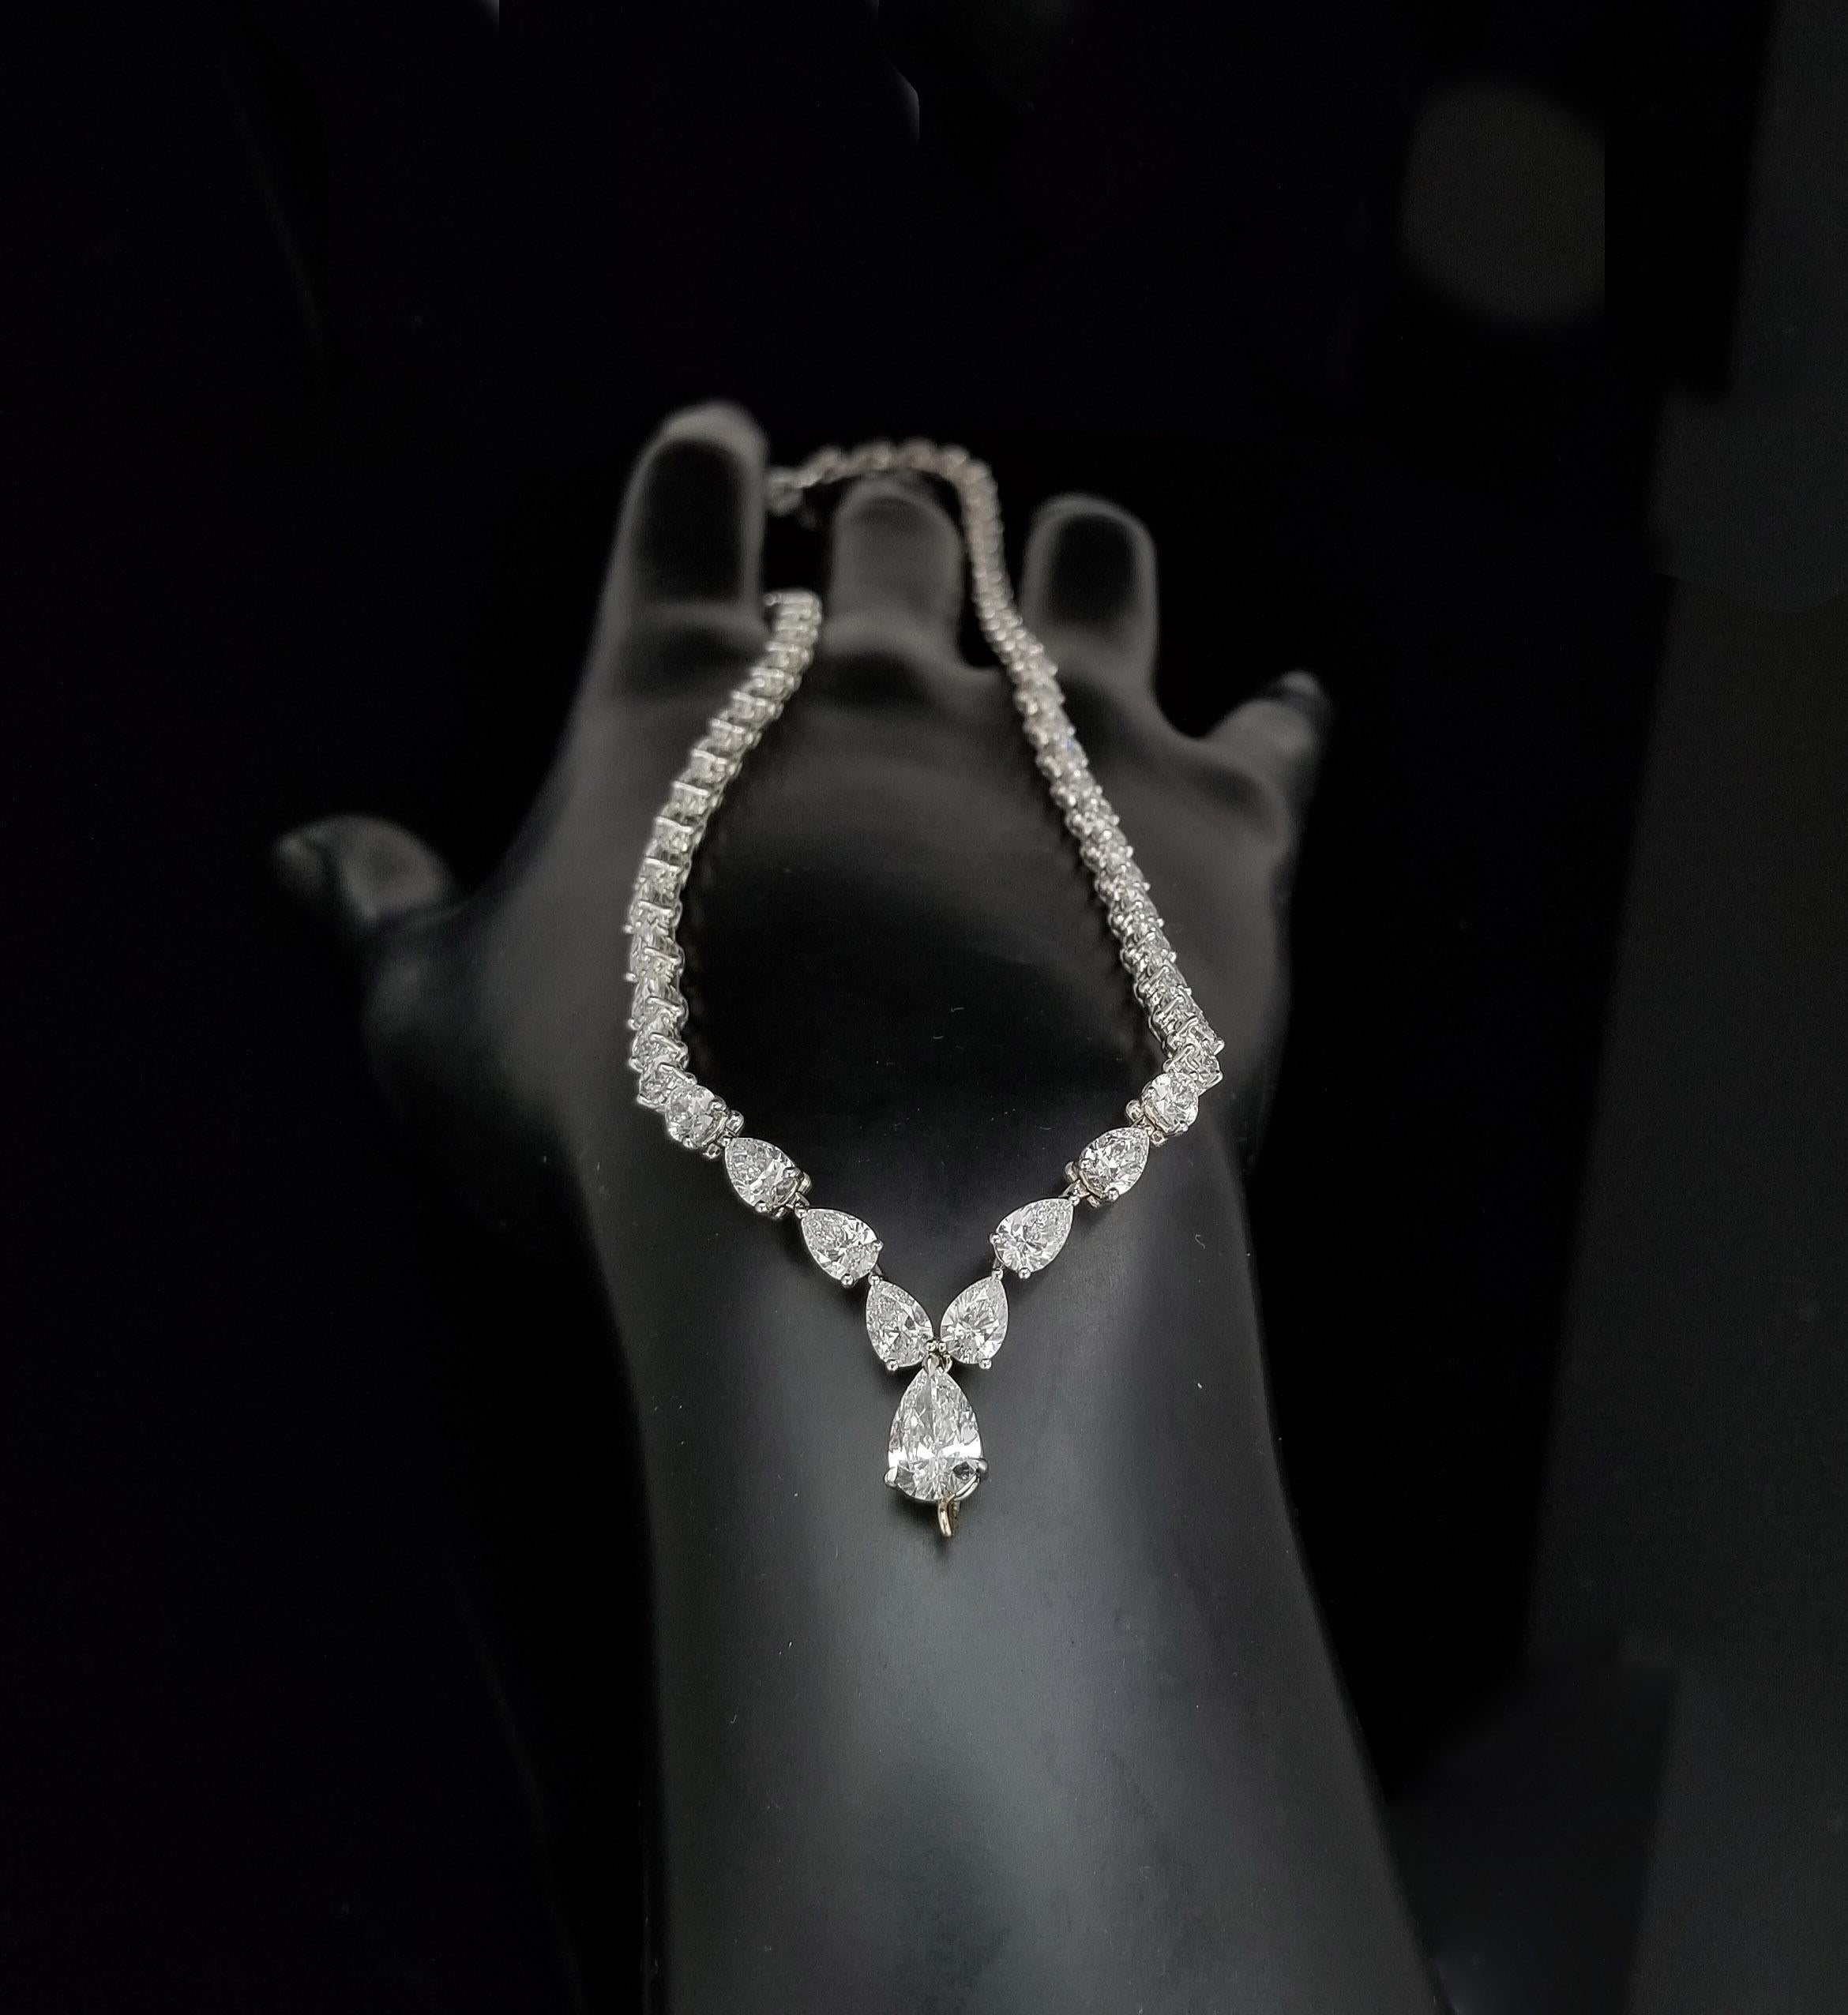 Scarselli is featuring a Platinum 22.22 carat Pear Cut Diamond Tennis Necklace. Total of 68 diamonds color graded D-E-F, and clarity VVS-SI encountered into a front drop pear cut diamond of over 1 carat (see certificate picture for detailed stone